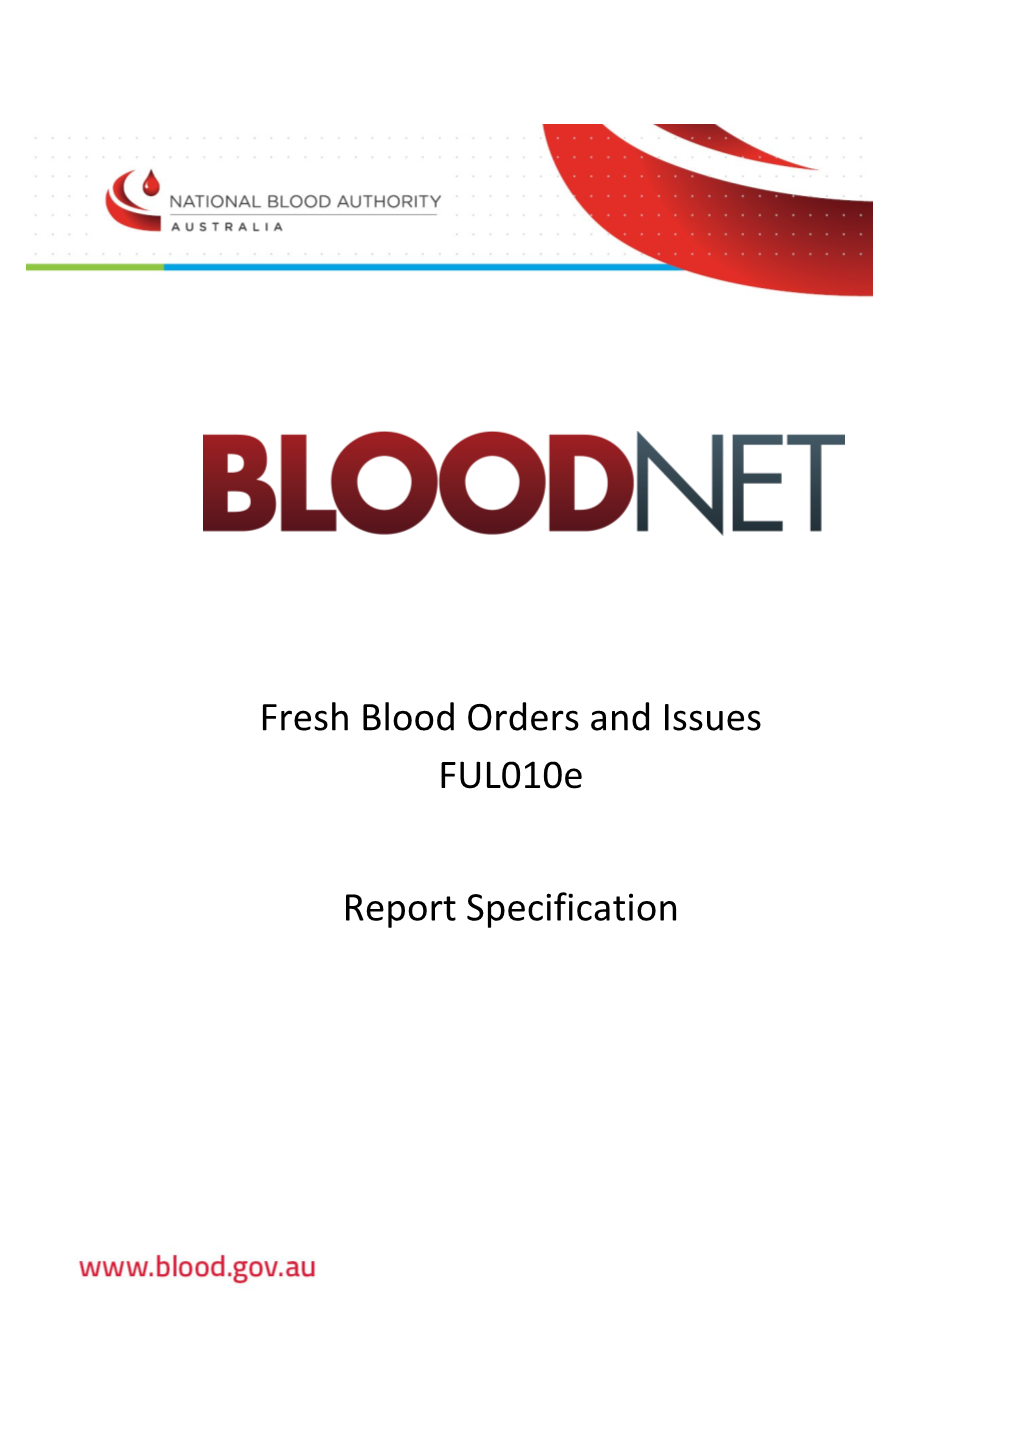 Bloodnet Ful010e Report Specificiation - Fresh Blood Orders and Issues Report - National